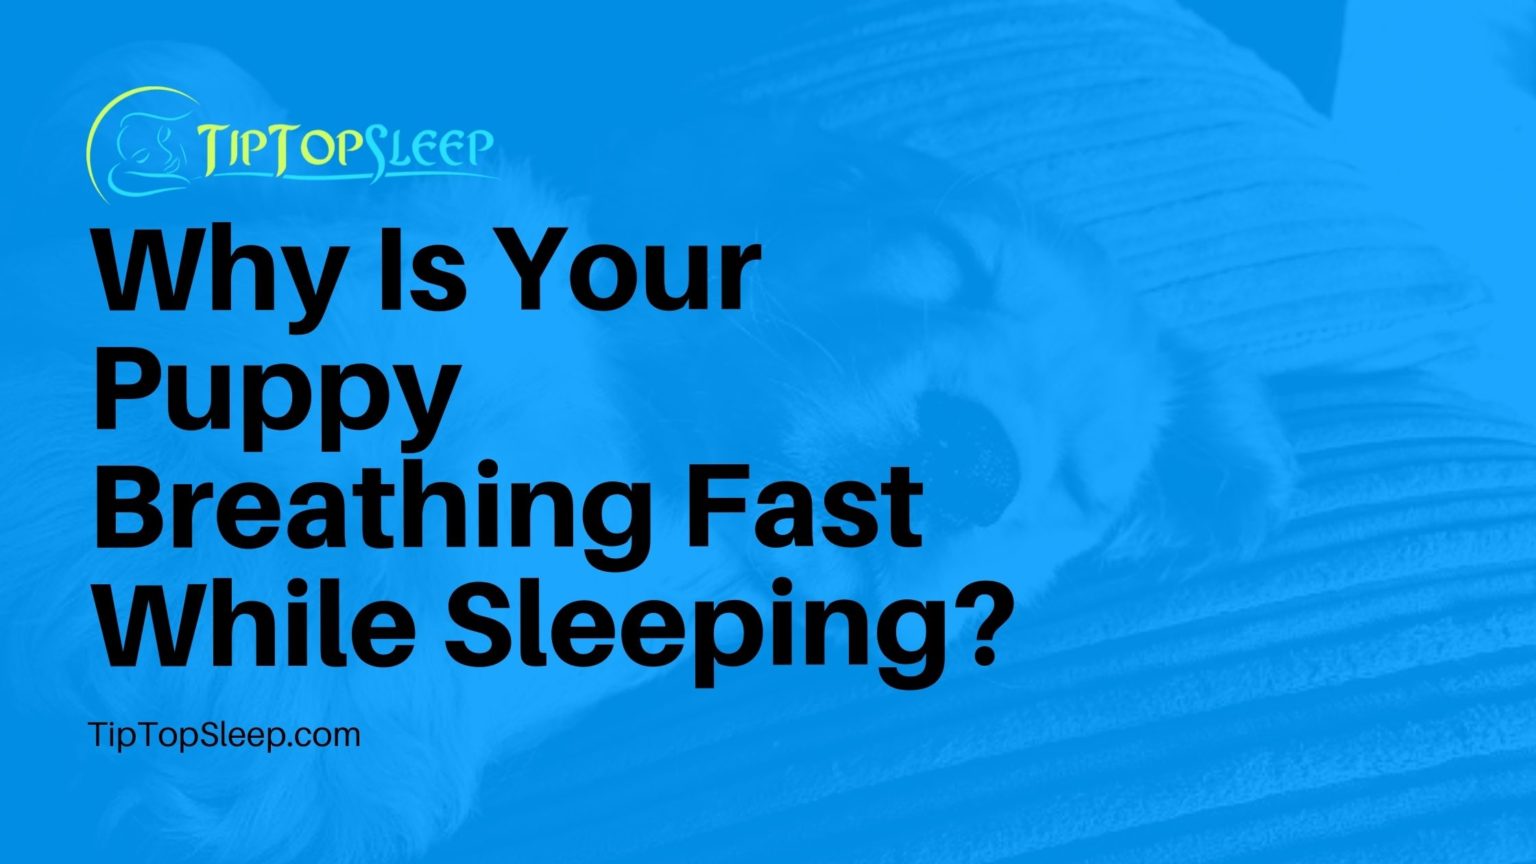 Why Is Your Puppy Breathing Fast While Sleeping?